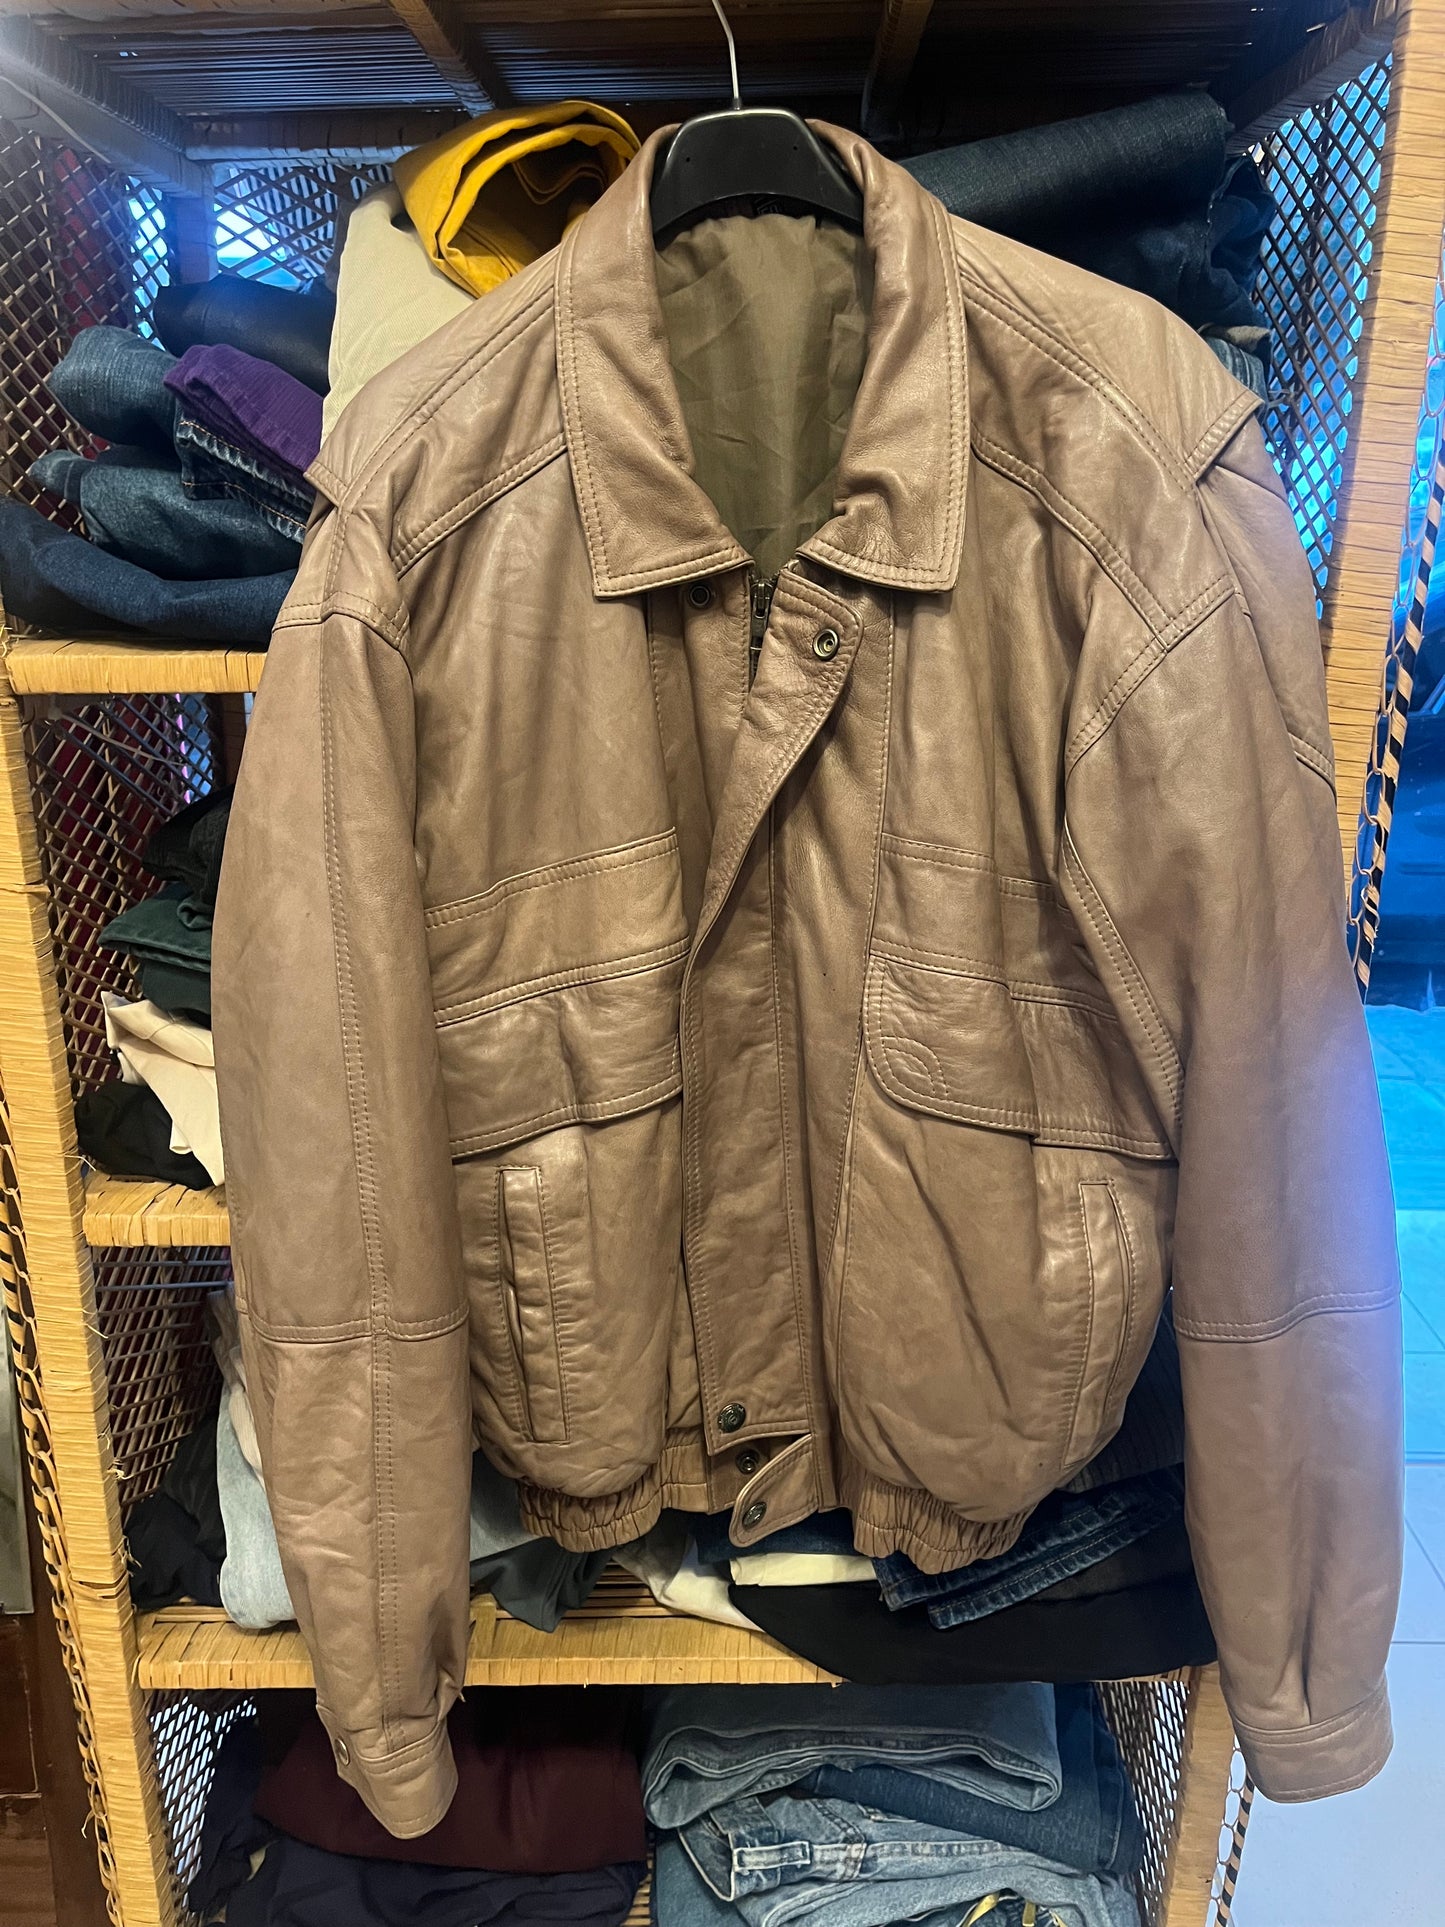 90s zip up genuine leather jacket .Fits S-L depending on desired suit .